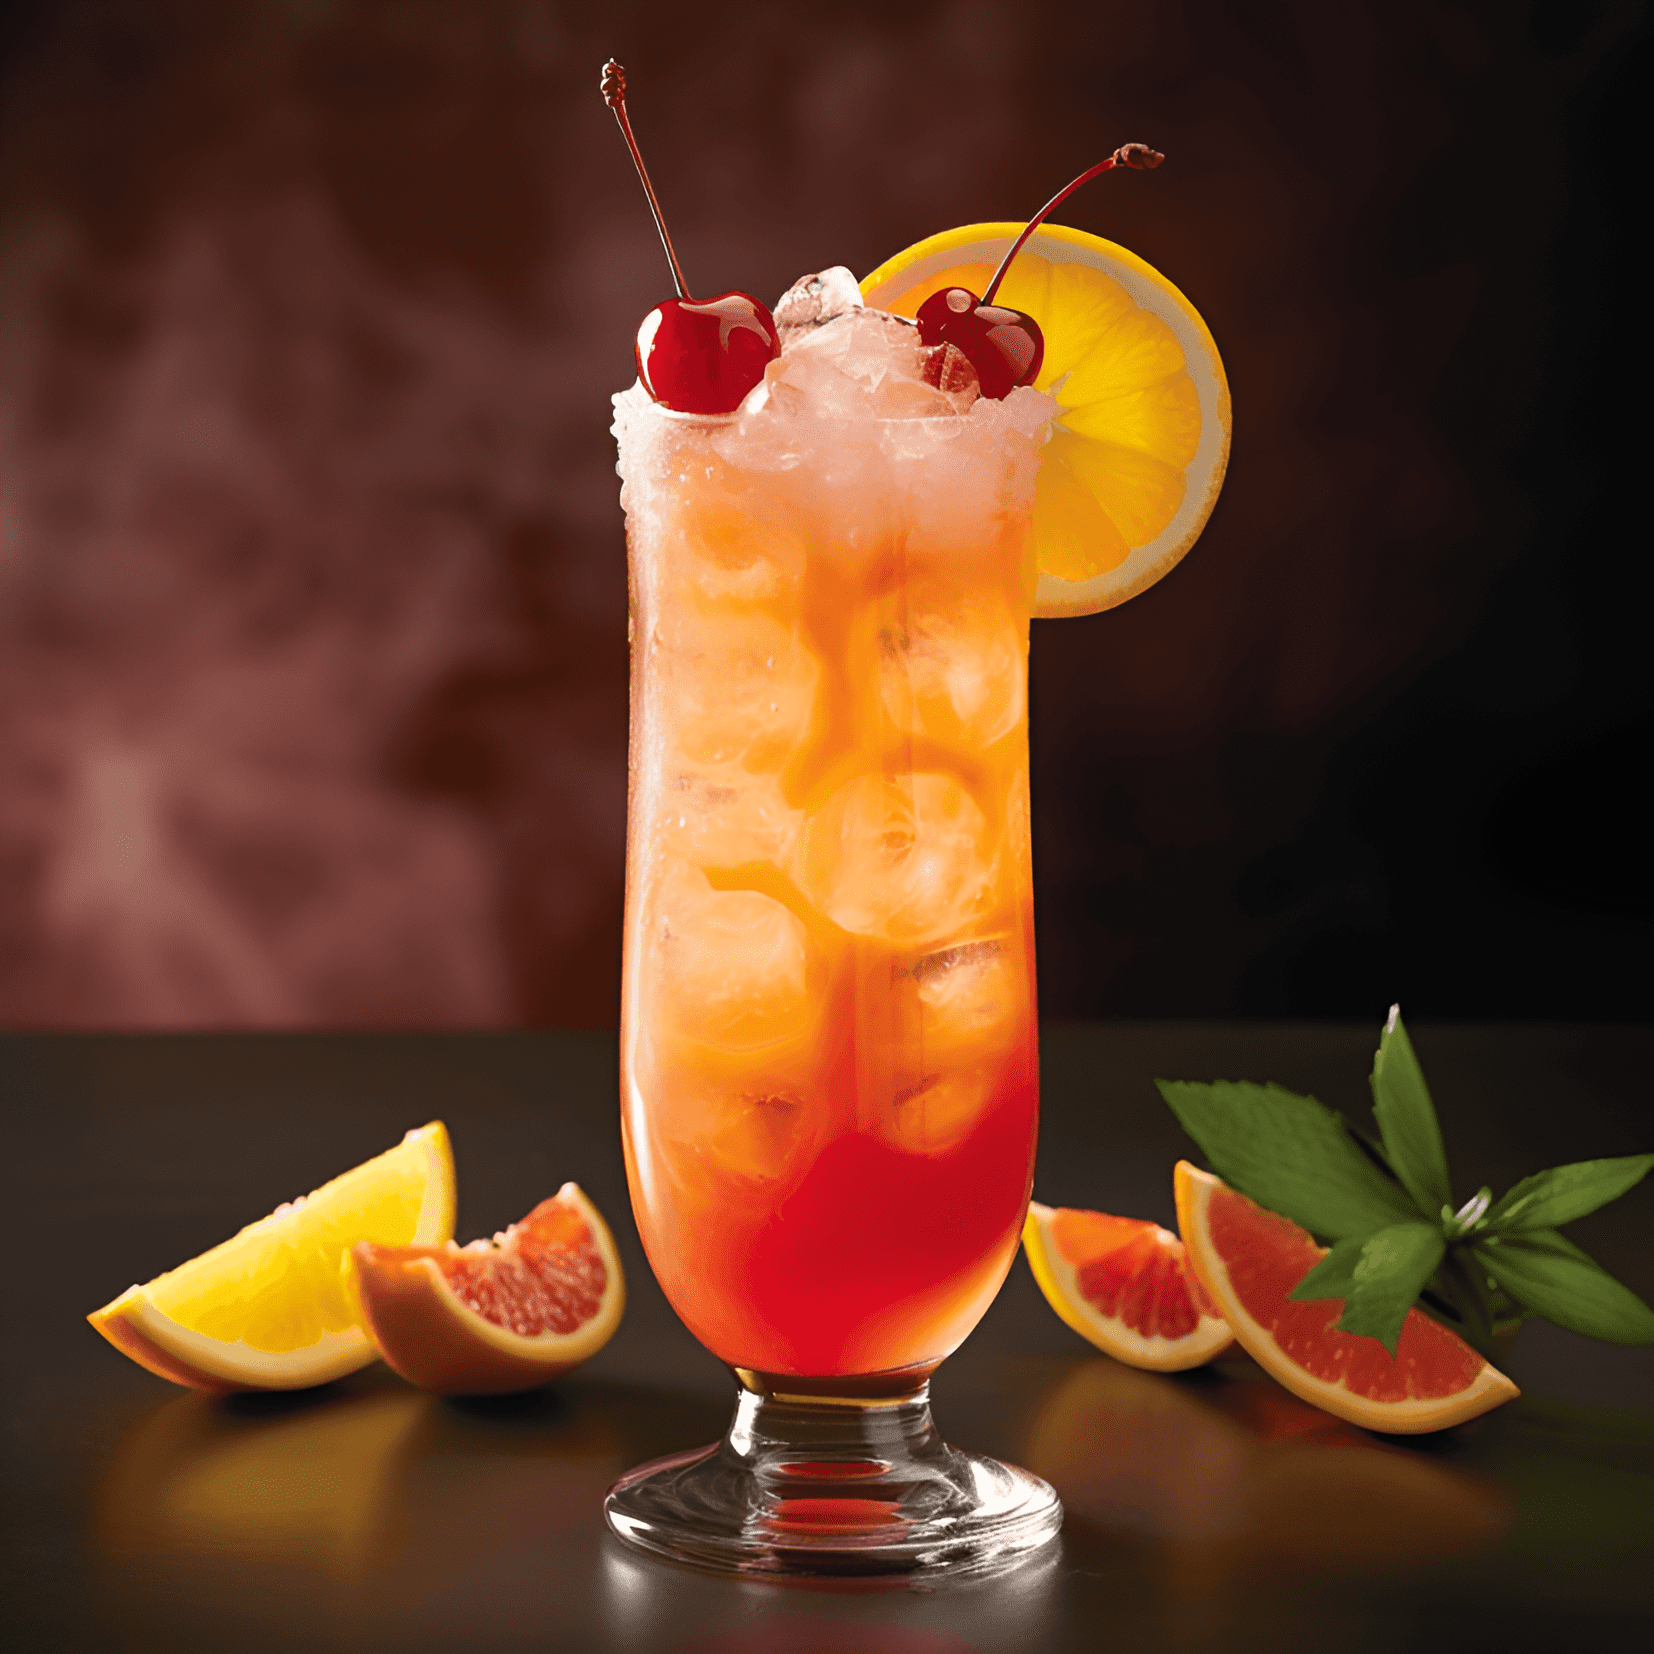 Florida Cocktail Recipe - The Florida cocktail is a delightful blend of sweet, sour, and fruity flavors. It has a refreshing citrus taste with a hint of tartness from the grapefruit, balanced by the sweetness of the orange juice and grenadine. The rum adds a smooth, warming sensation, making it a perfect drink for both hot summer days and cool evenings.